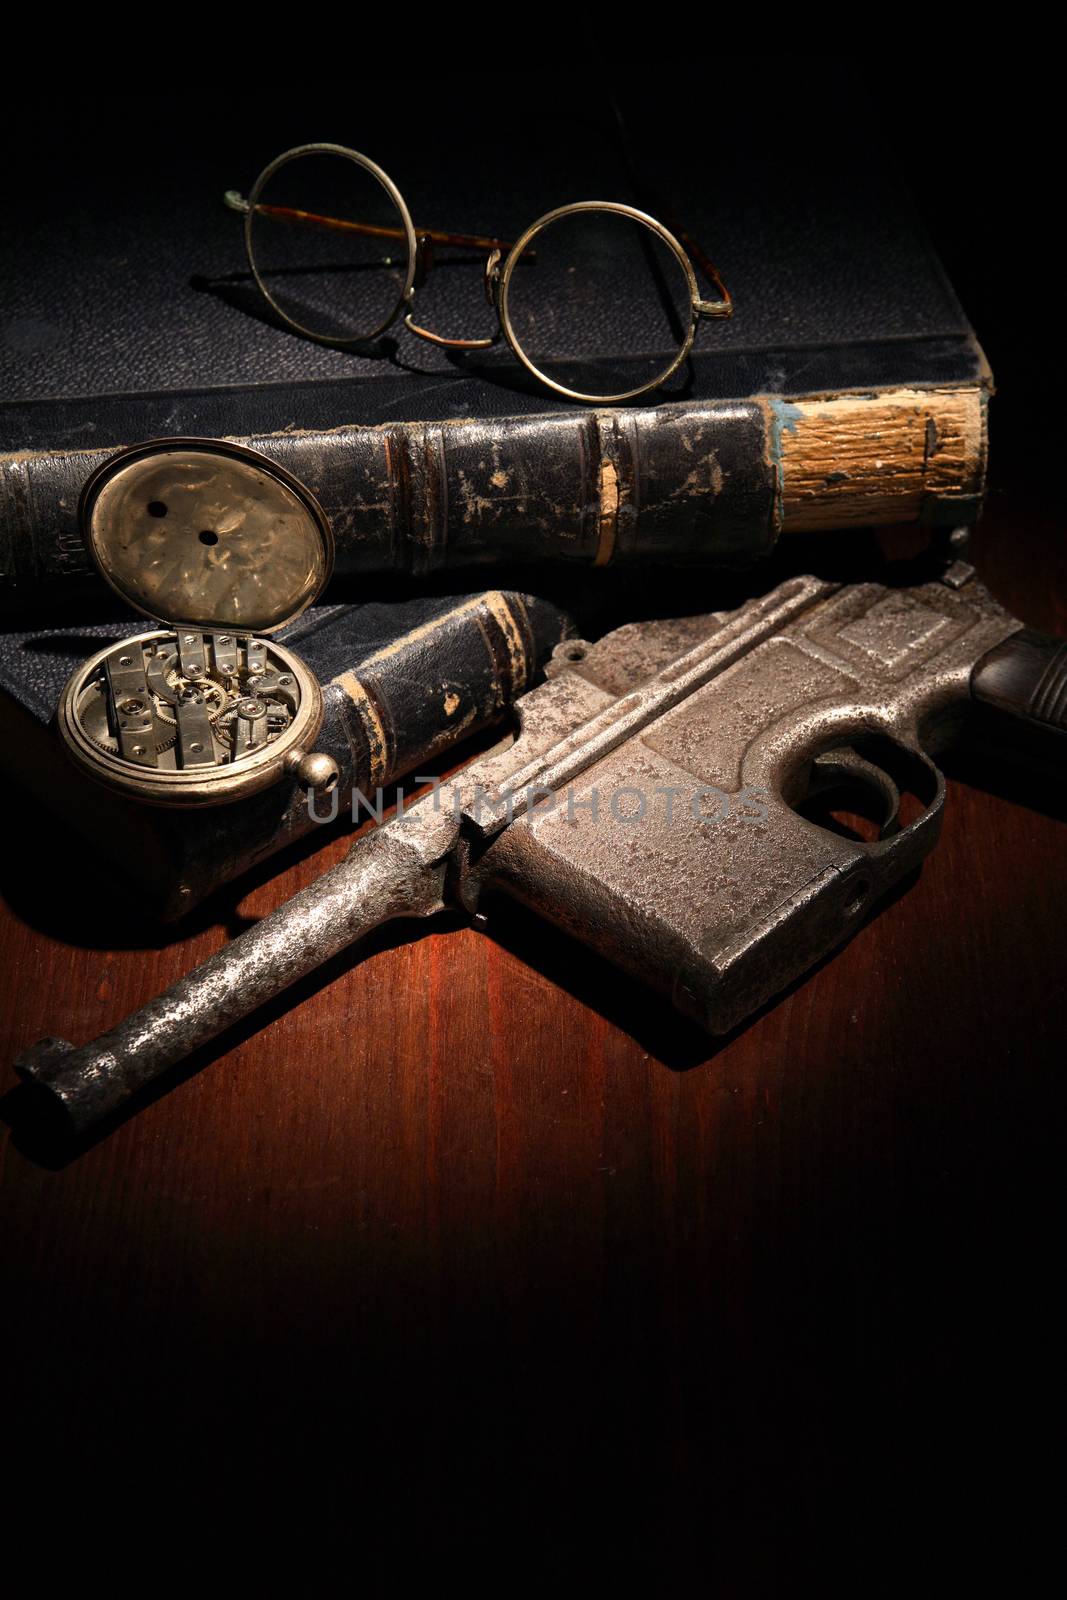 Vintage still life with handgun and spectacles near old books